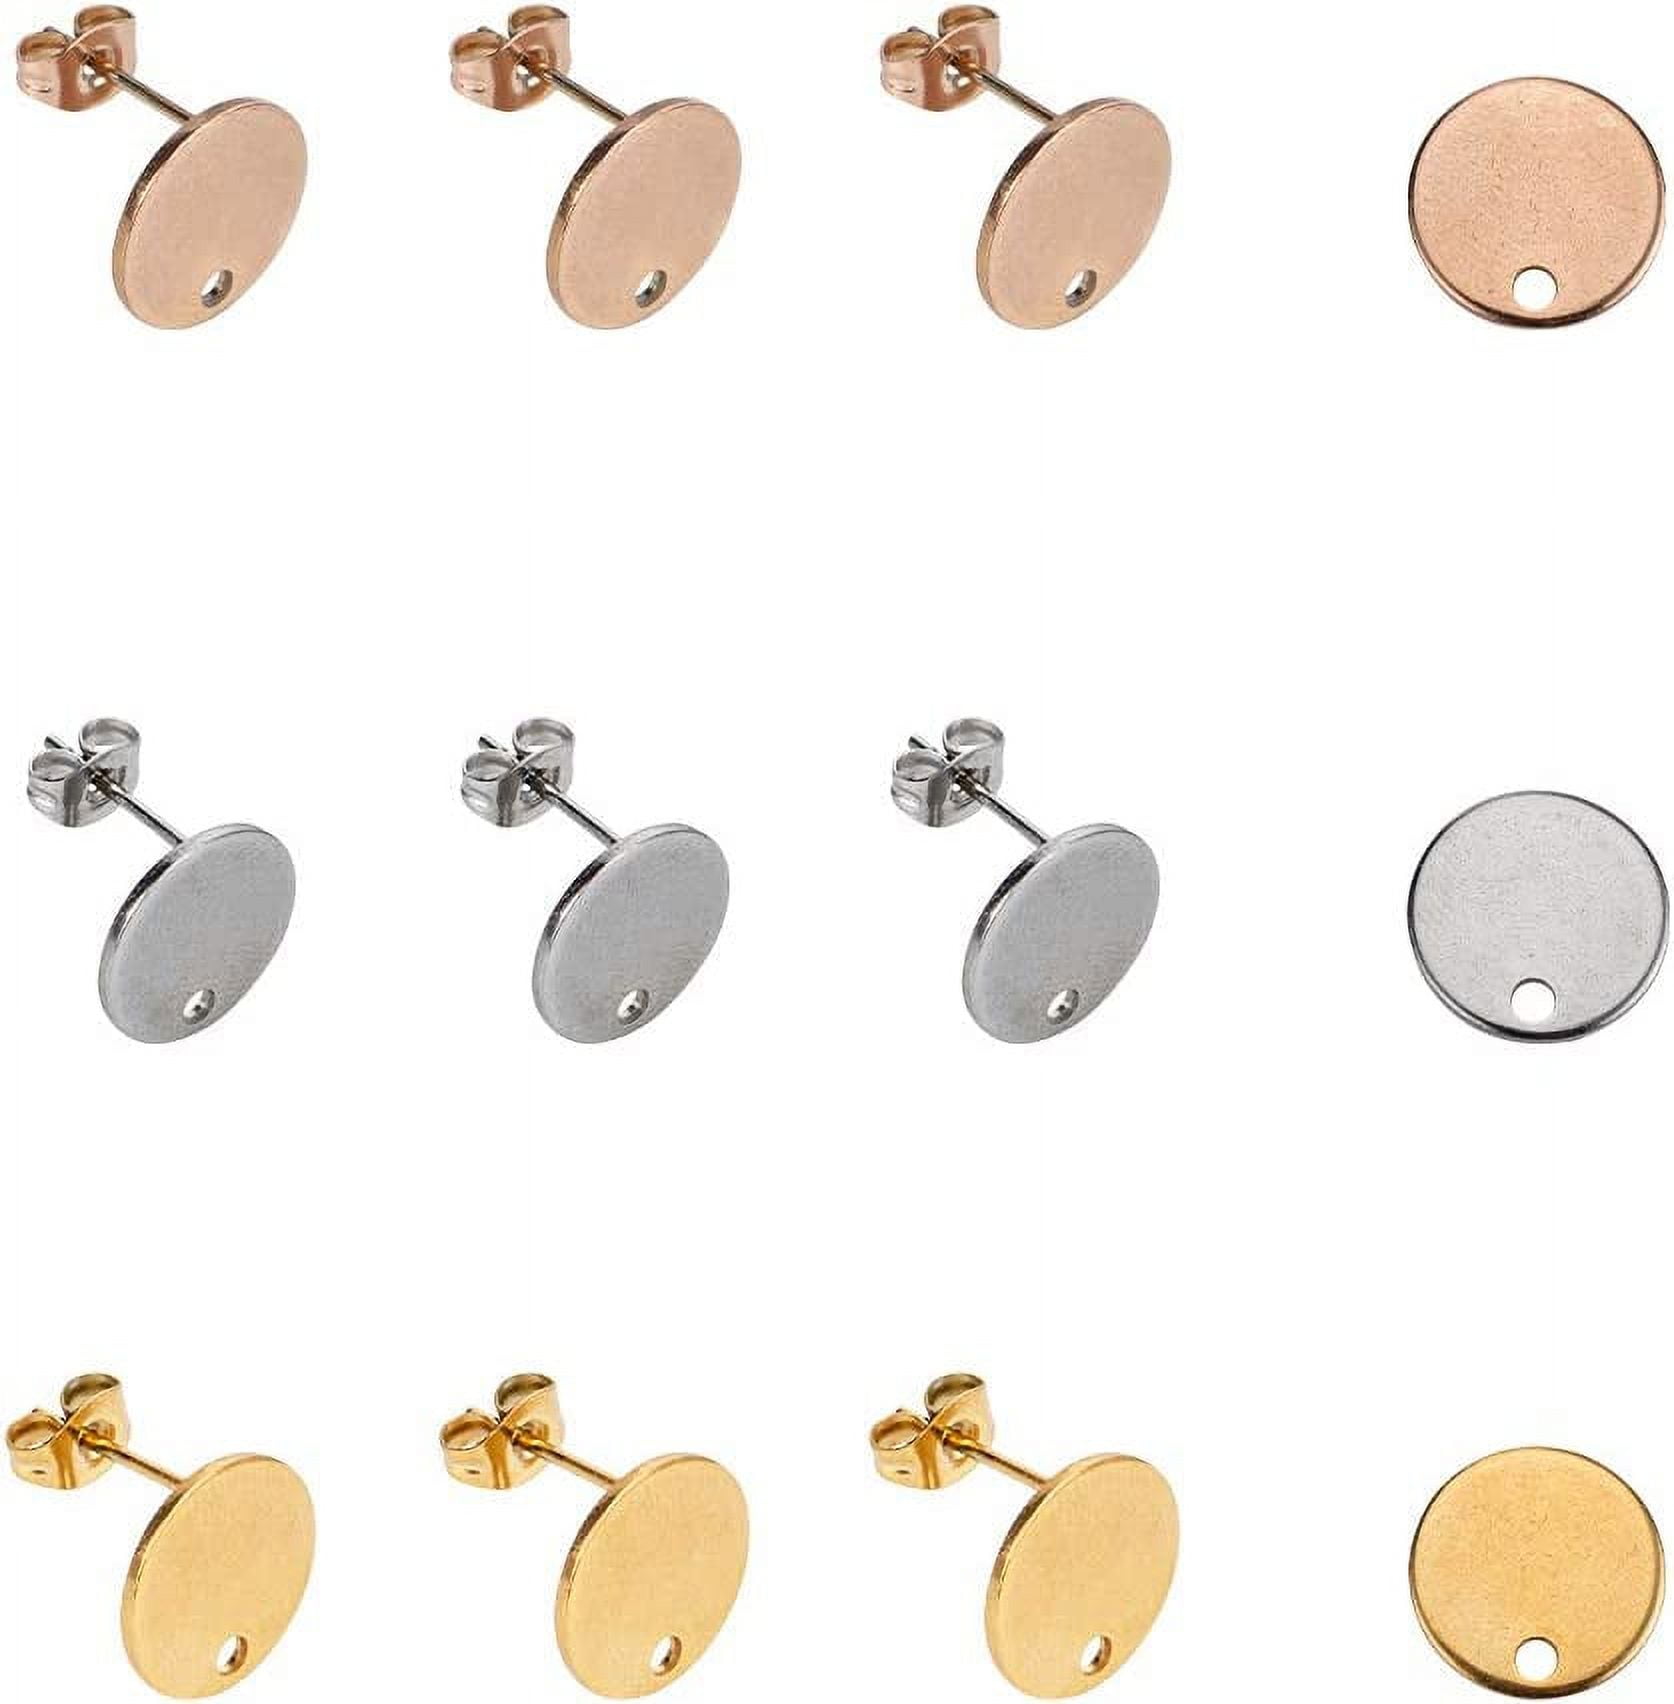 40pcs Rose Gold Stud Earring Findings with Ear Nuts Flat Round Stainless Steel Earrings with Loop Stud Earring with Flat Plate for Earring Jewelry